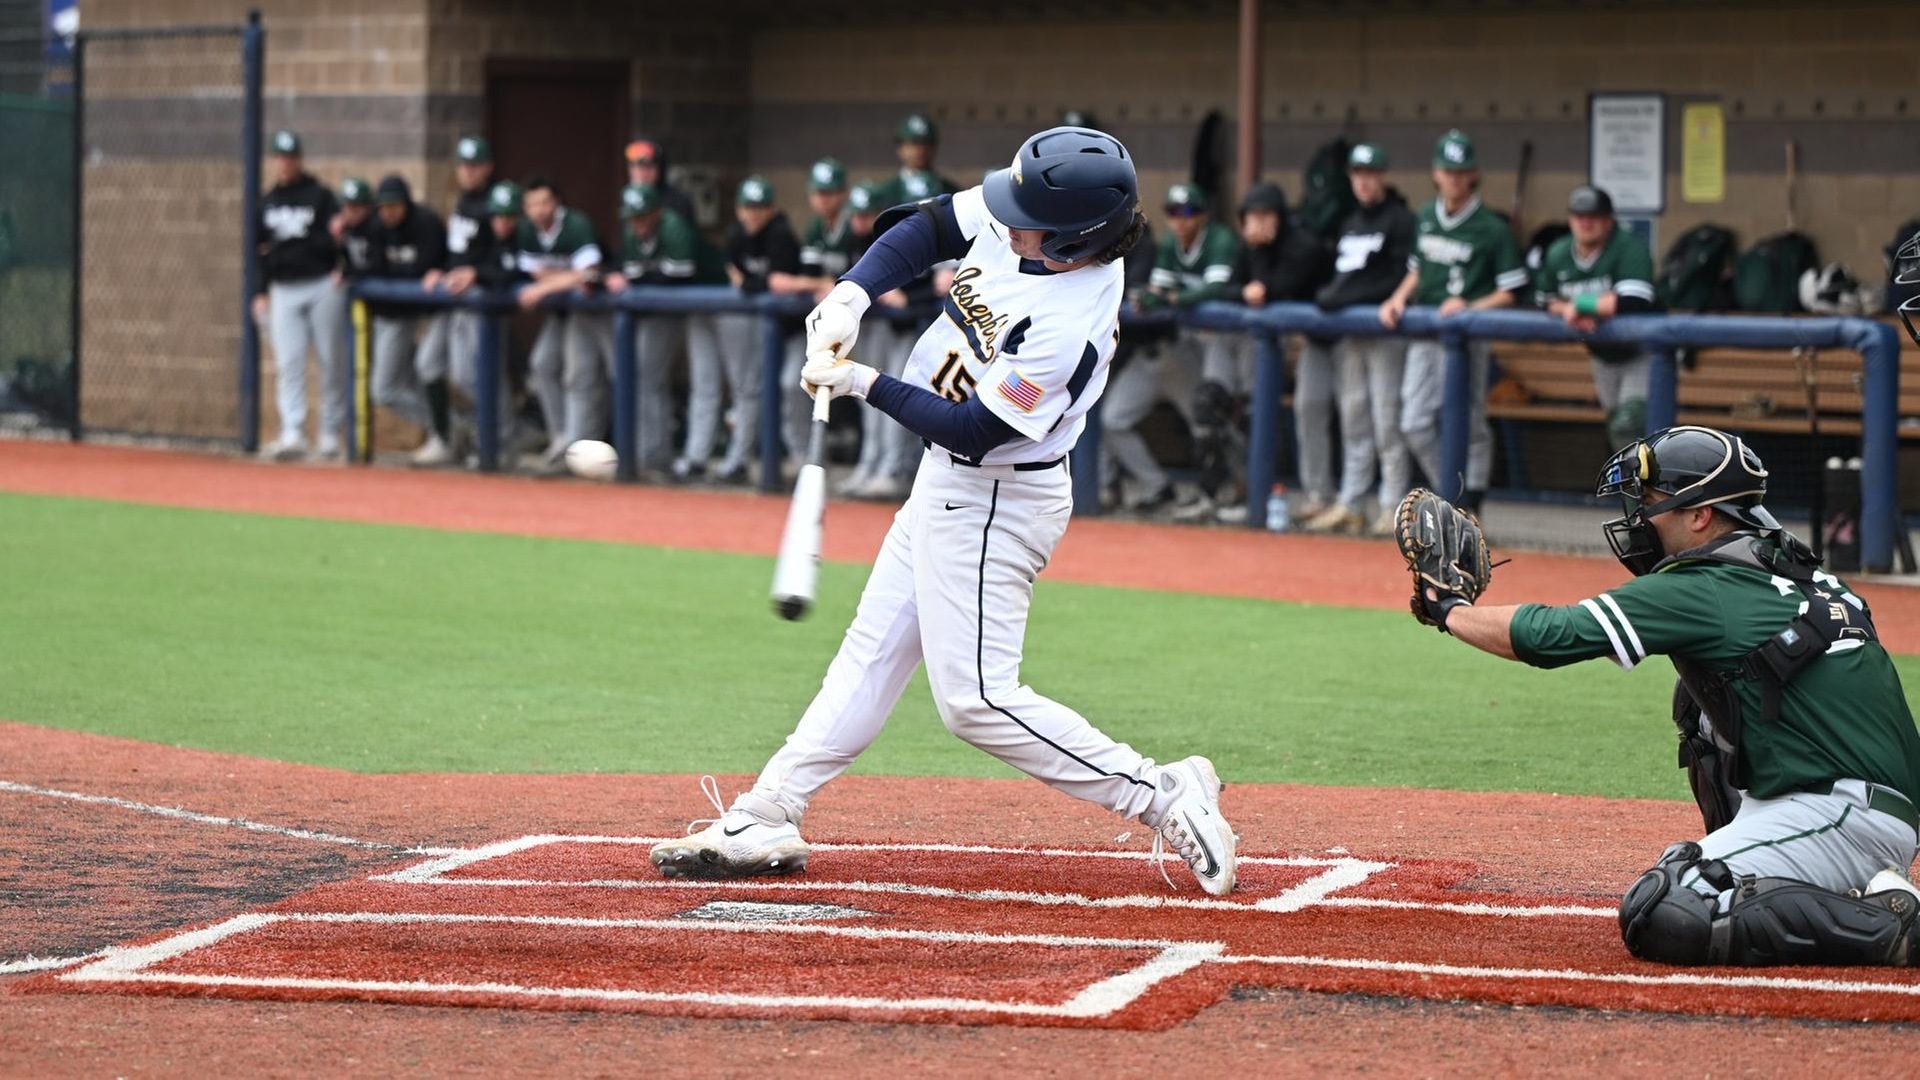 Baseball Claims 14th Consecutive Victory with a Pair of Wins Over OW